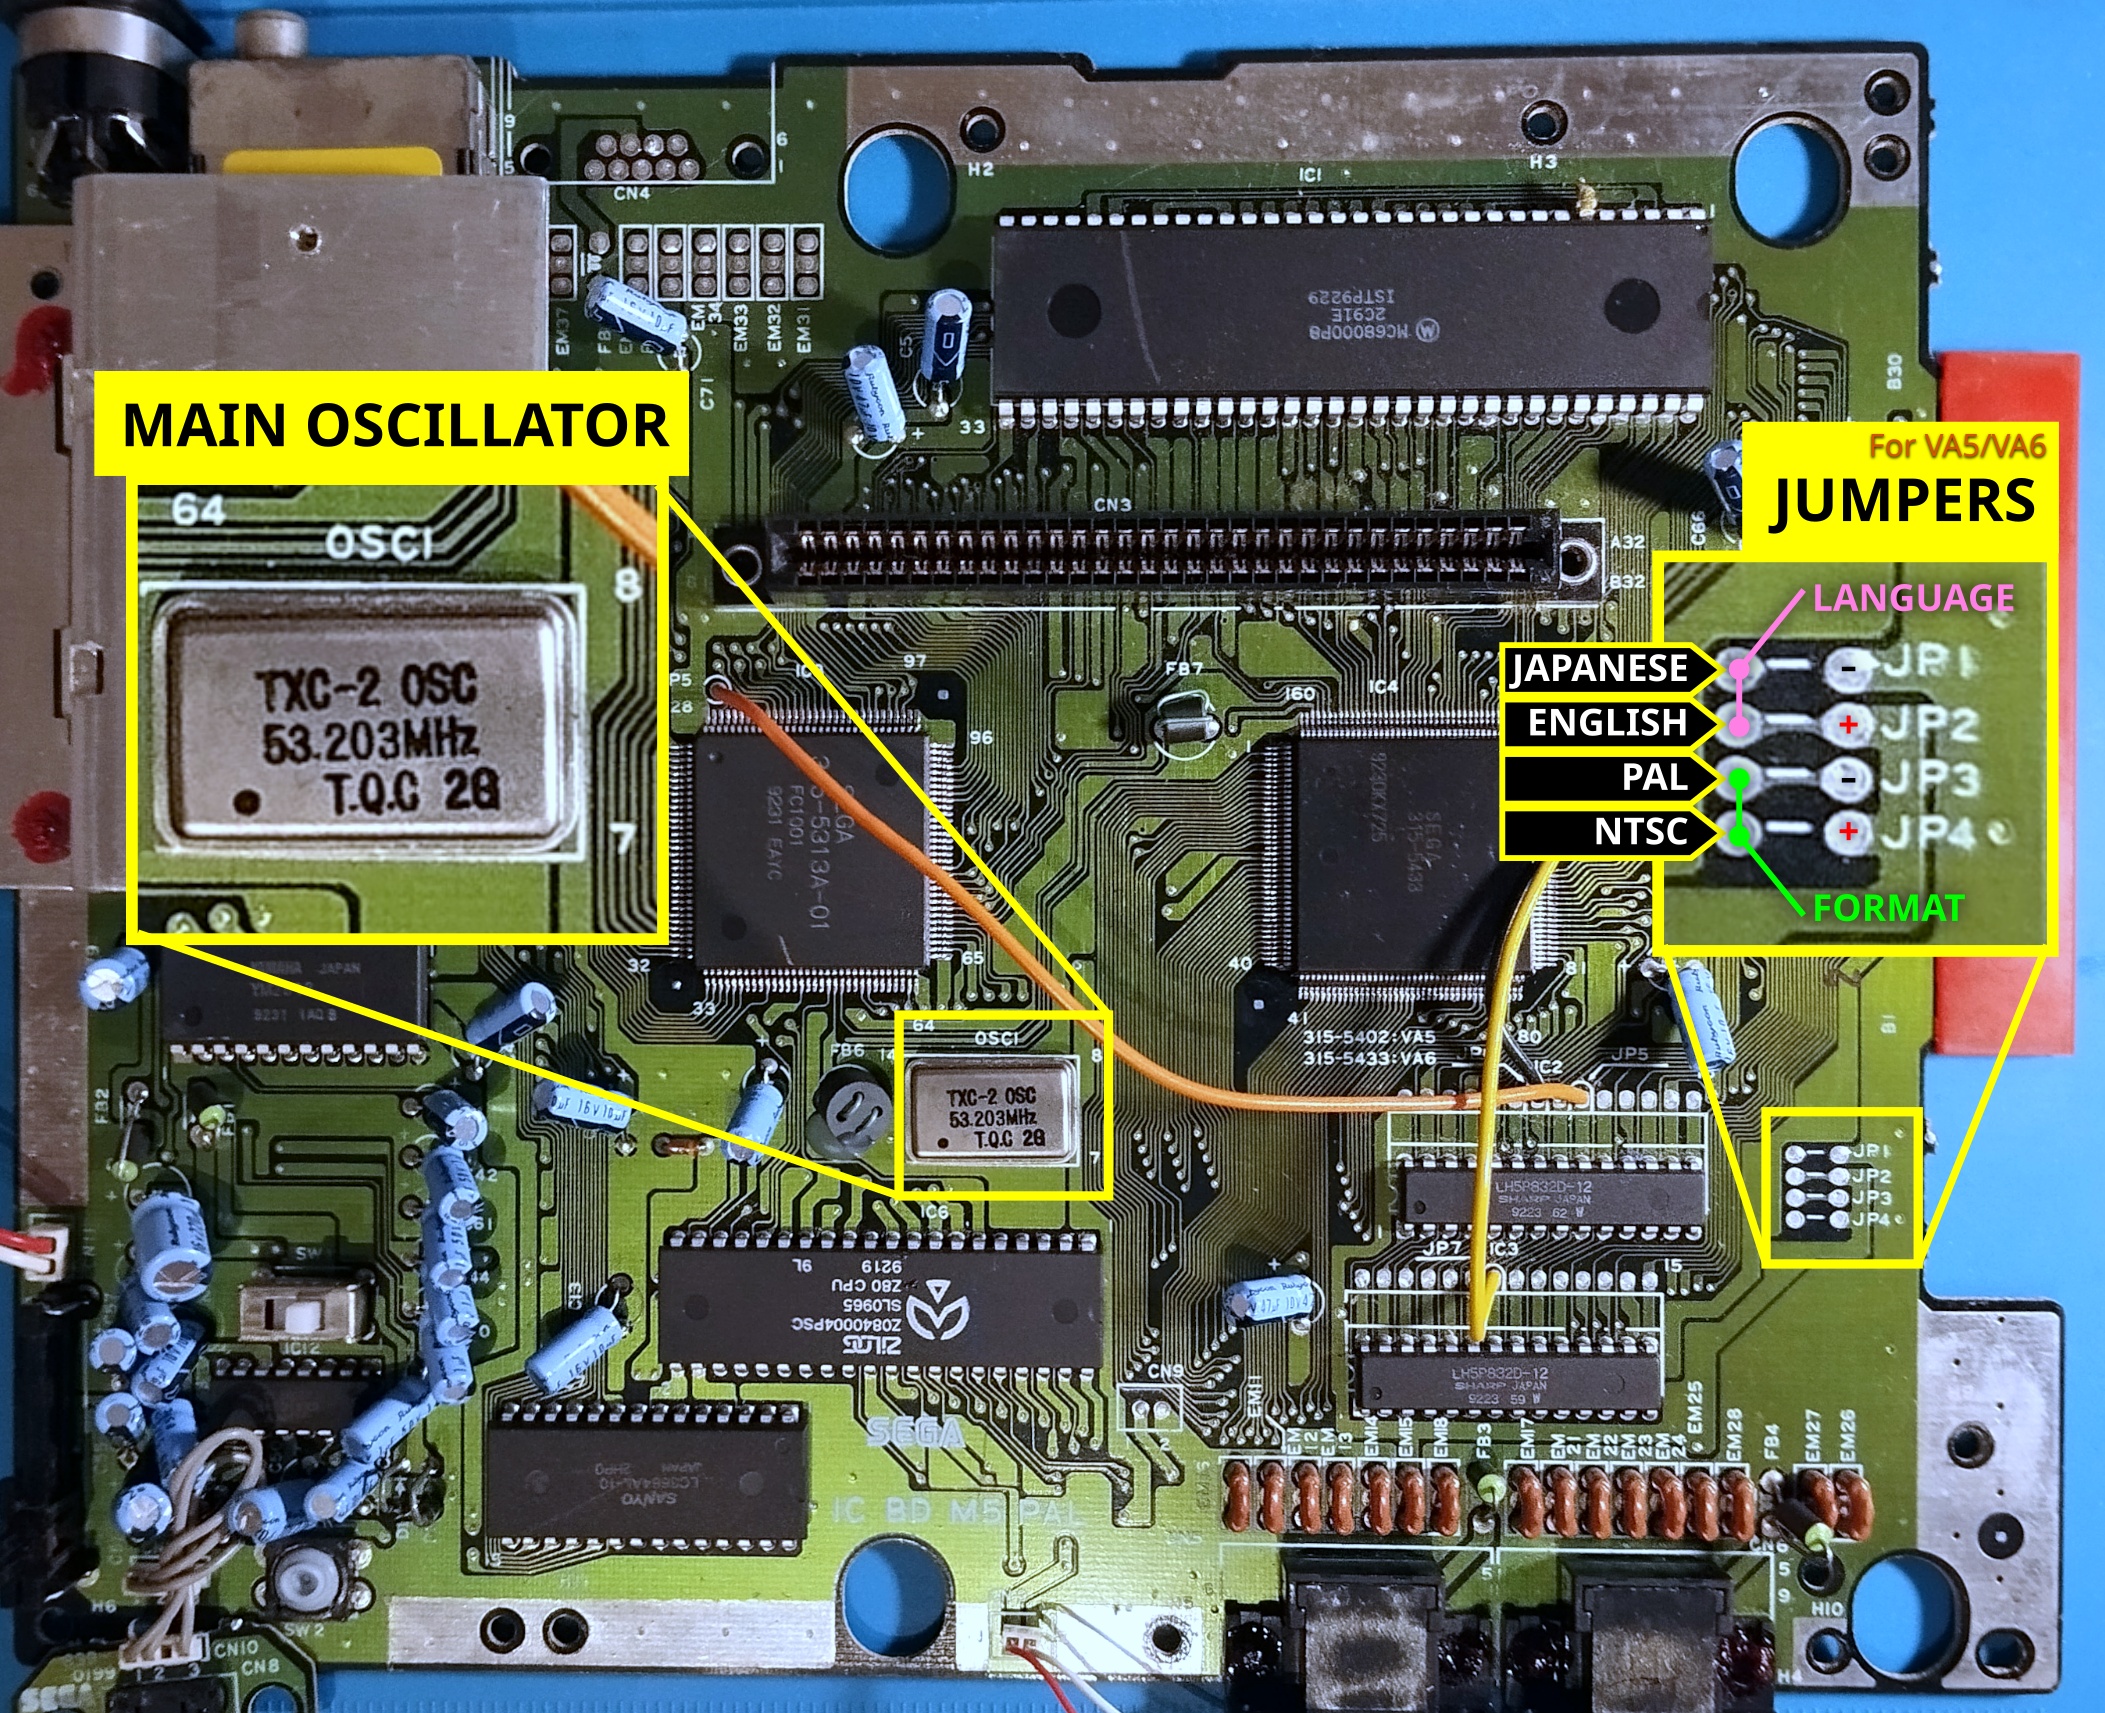 The main circuit board of the unit. The region settings and main oscillator are zoomed in.